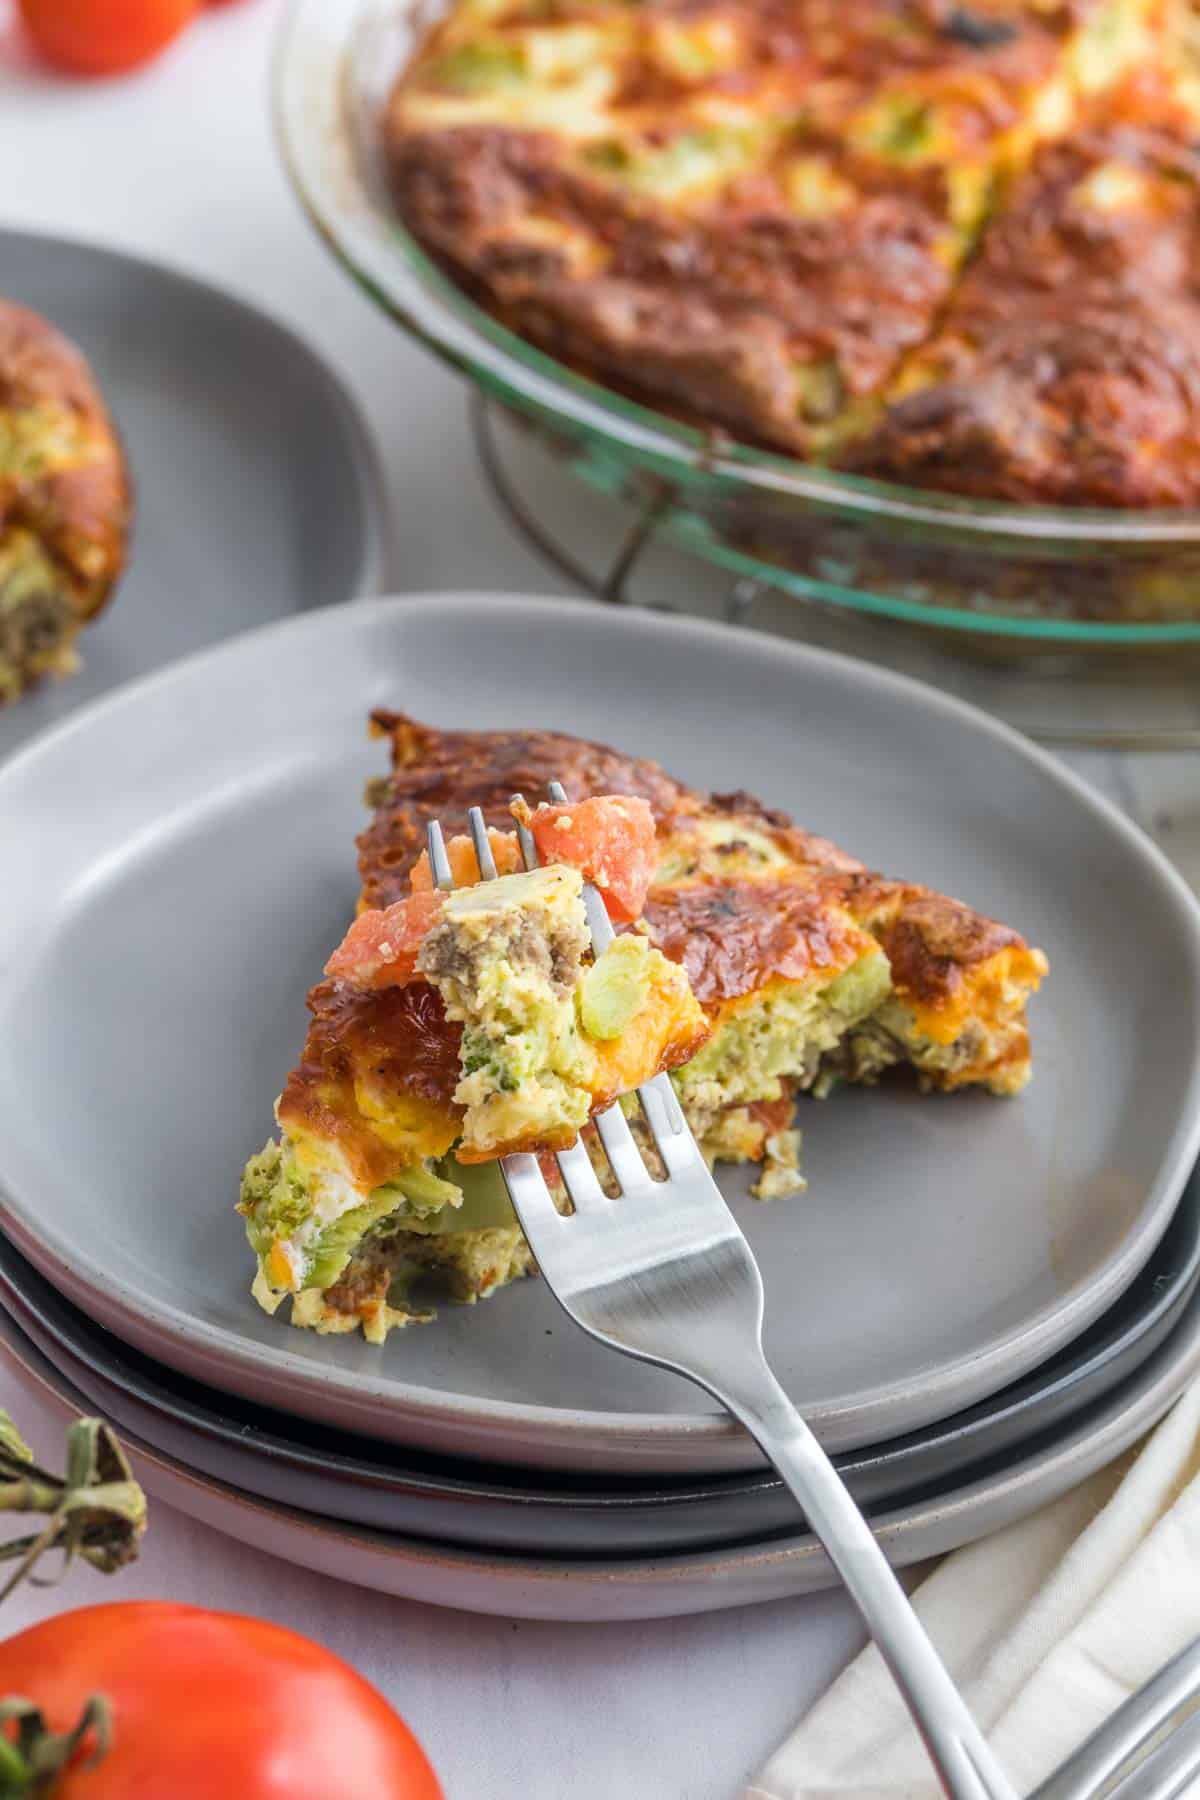 A slice of tomato broccoli sausage quiche on plate with a work that has a bite of the quiche on it.